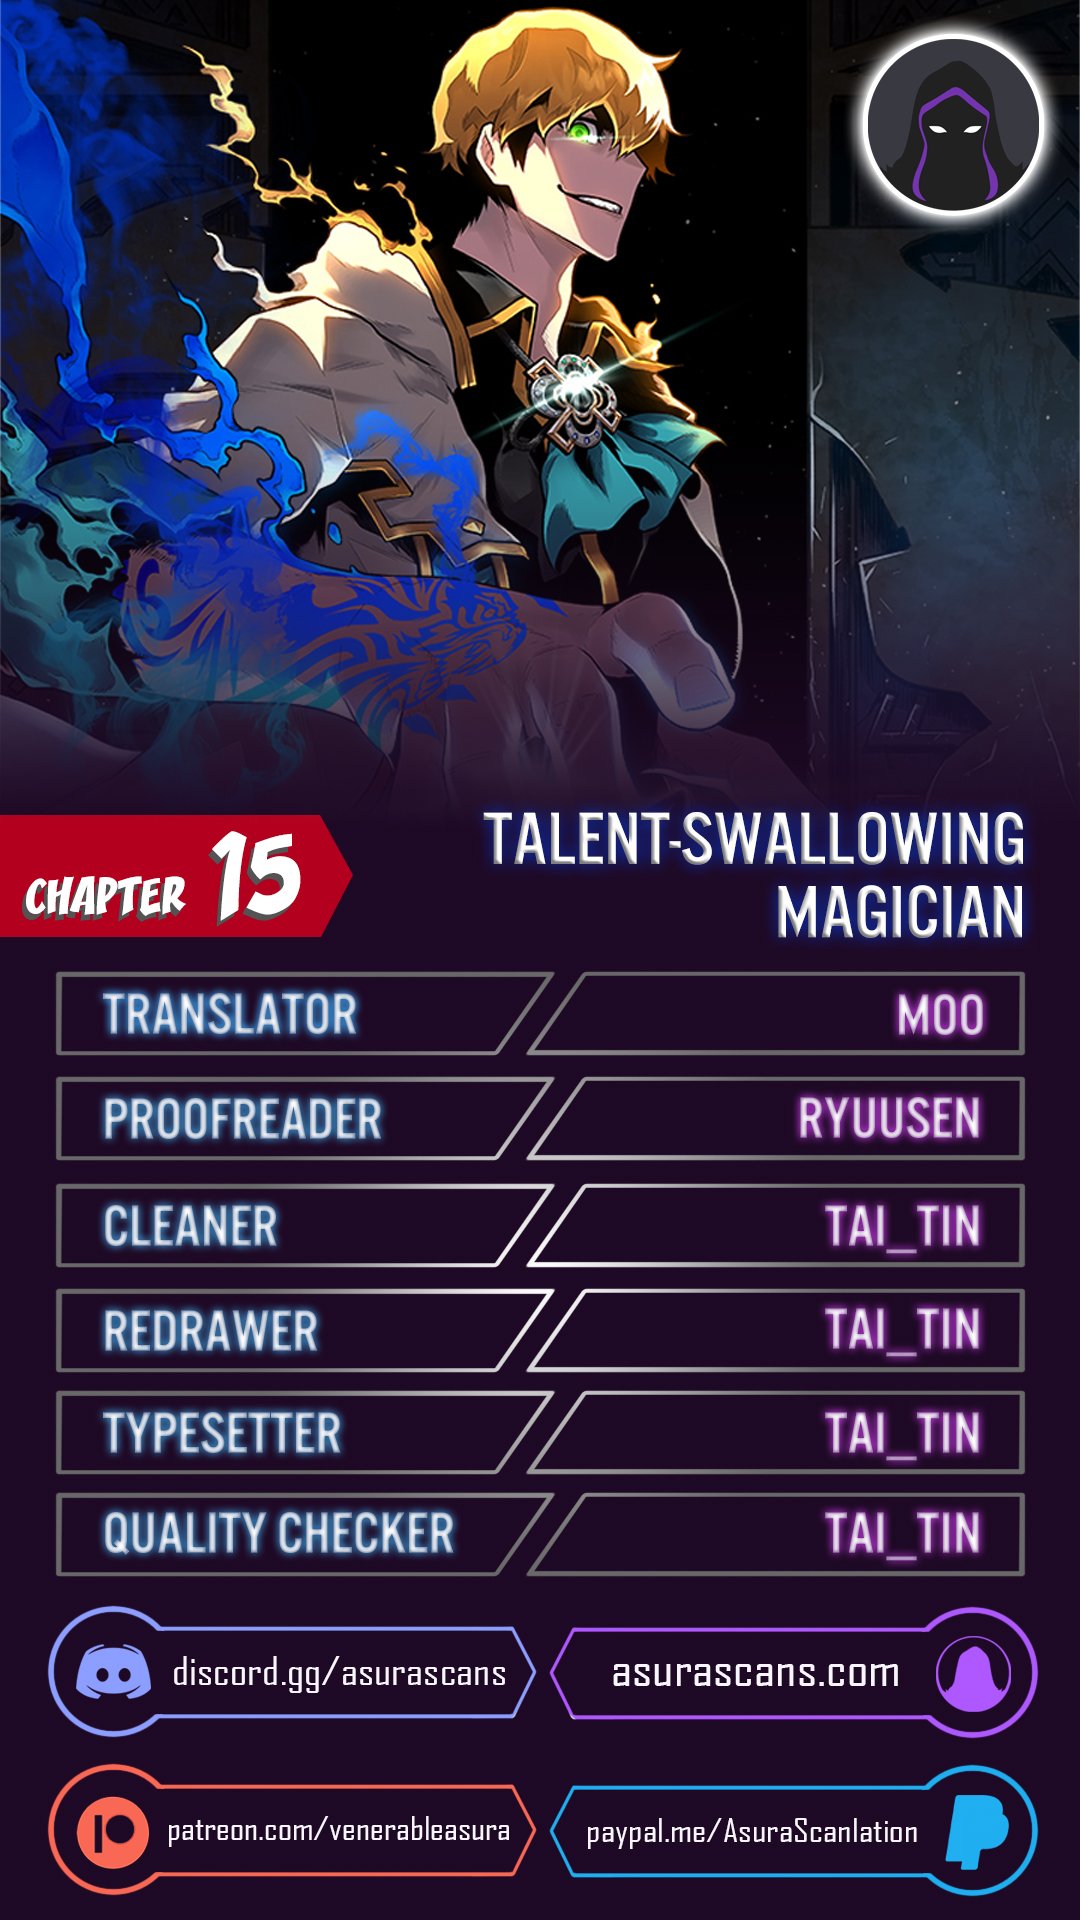 Talent-Swallowing Magician - Chapter 15413 - Image 1